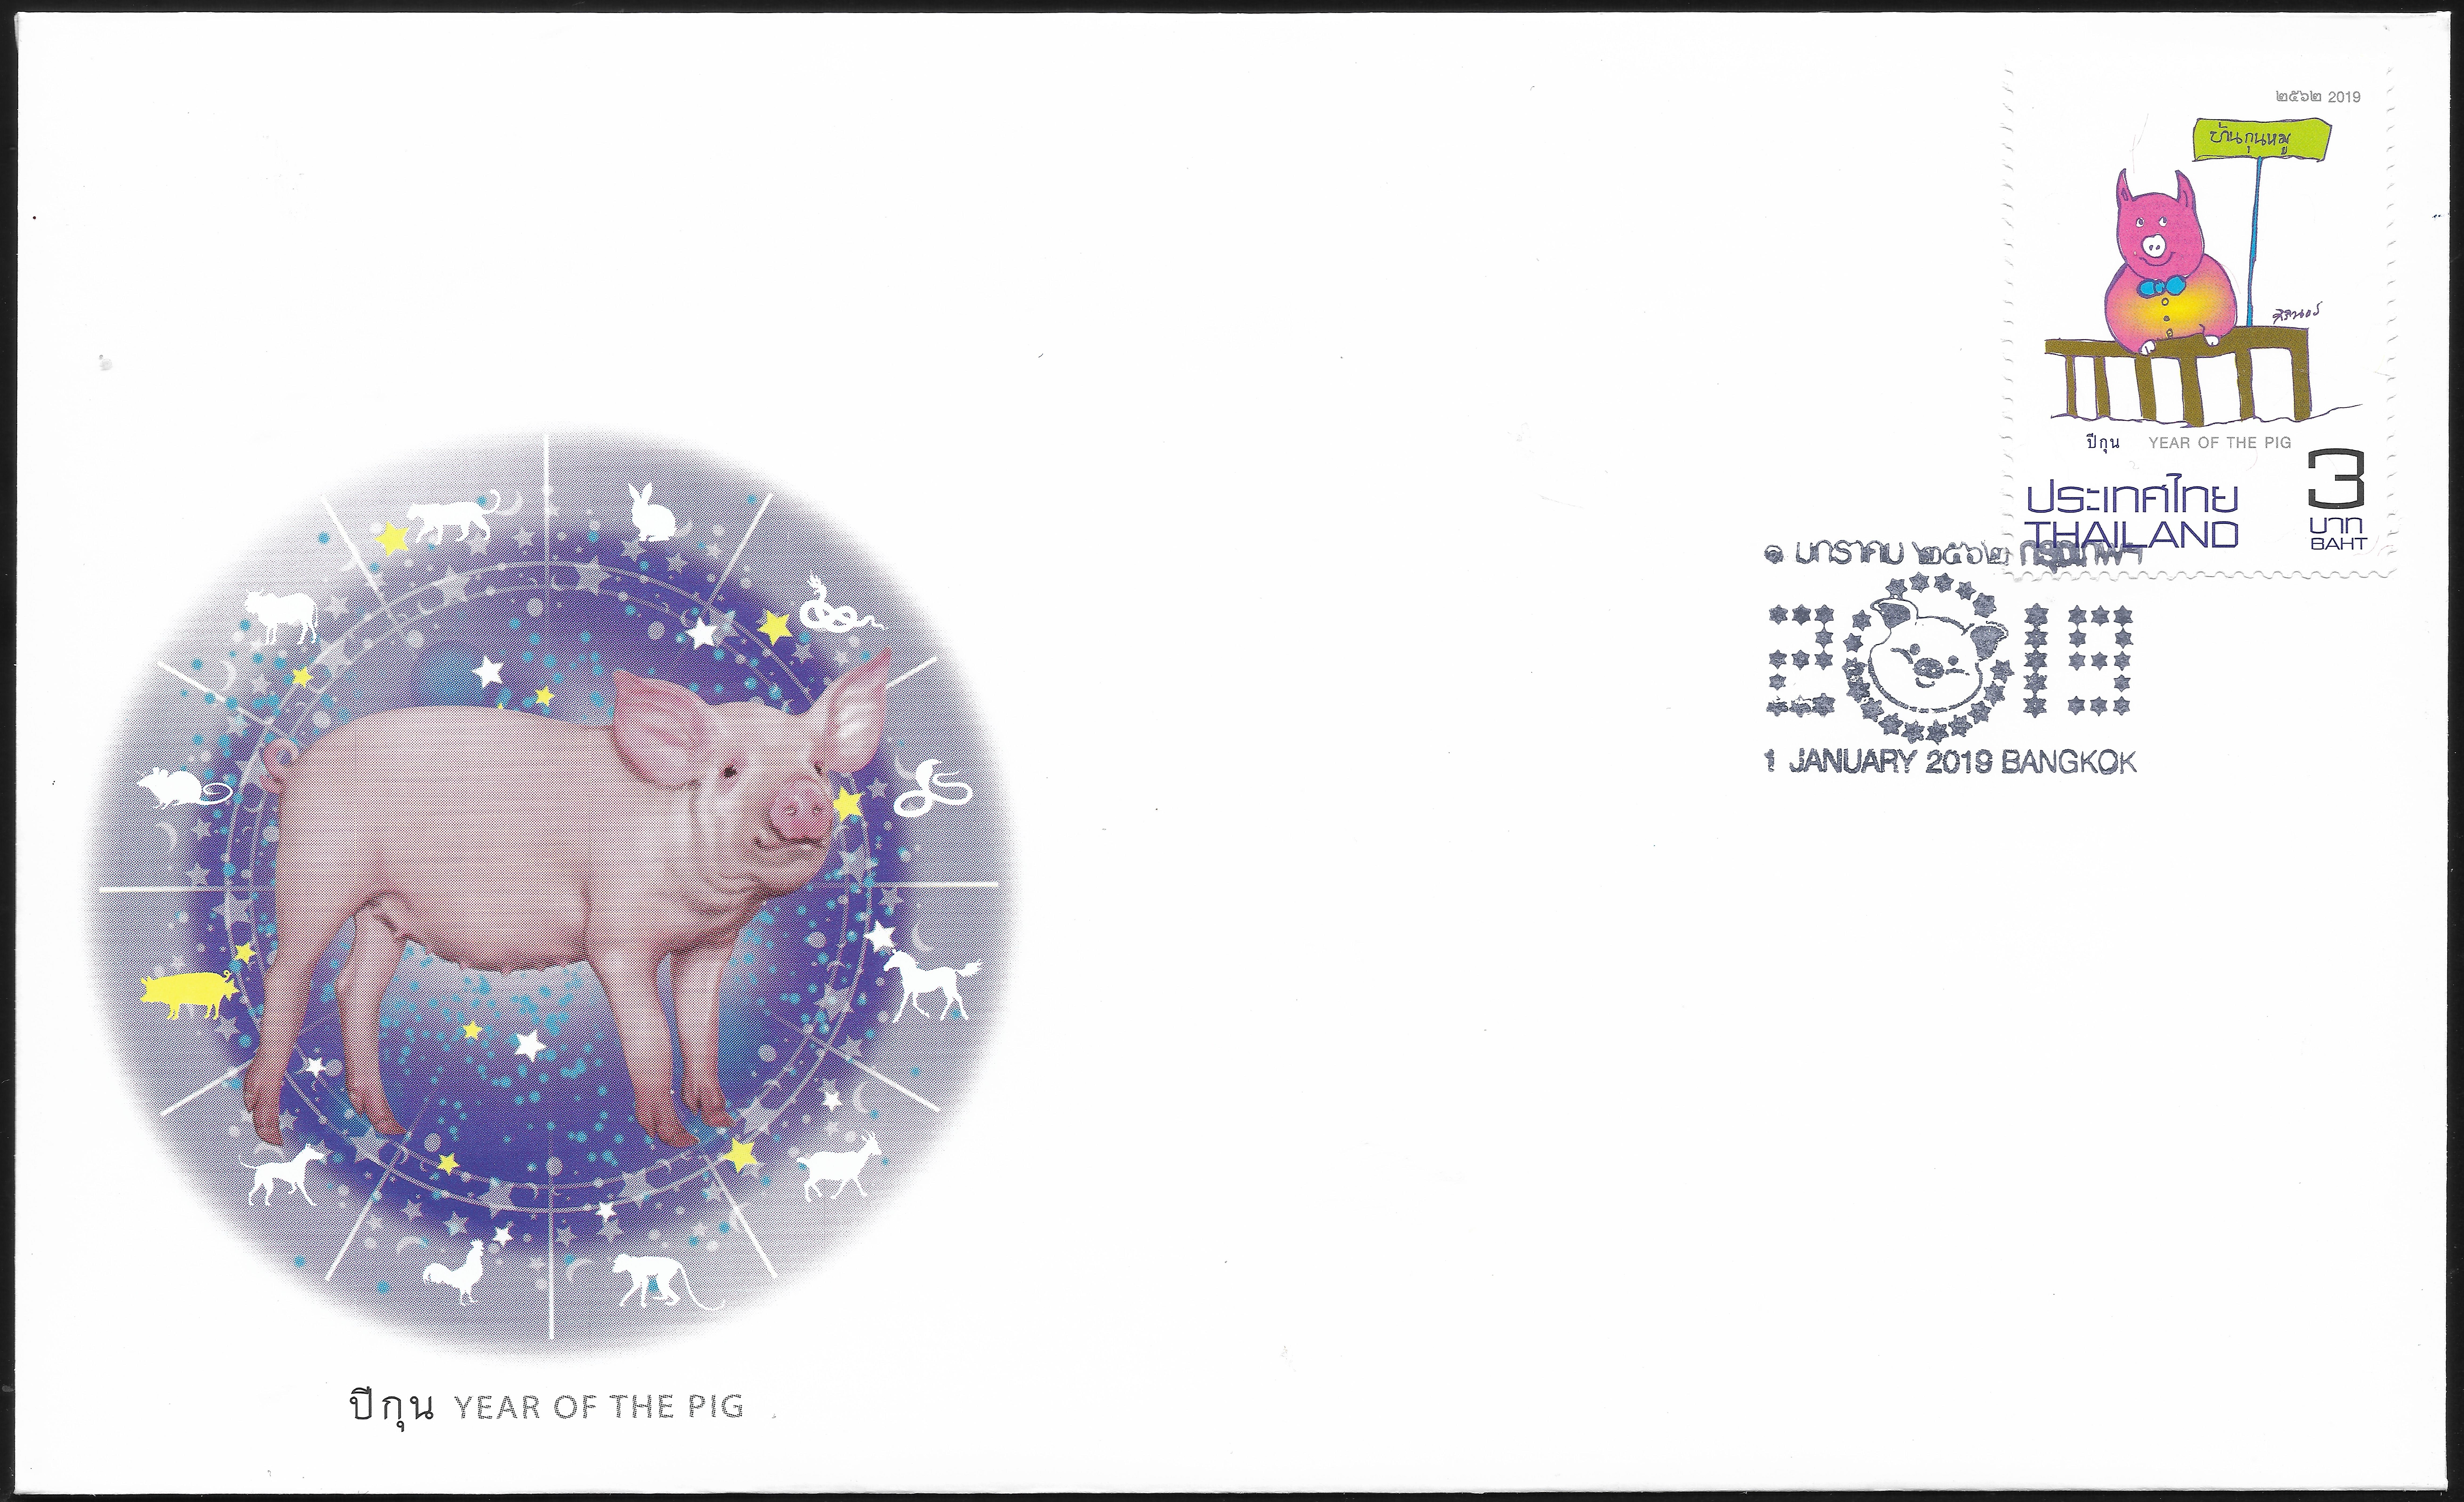 Thailand - Thailand Post #TH1162 (2019) first day cover - released January 1, 2019